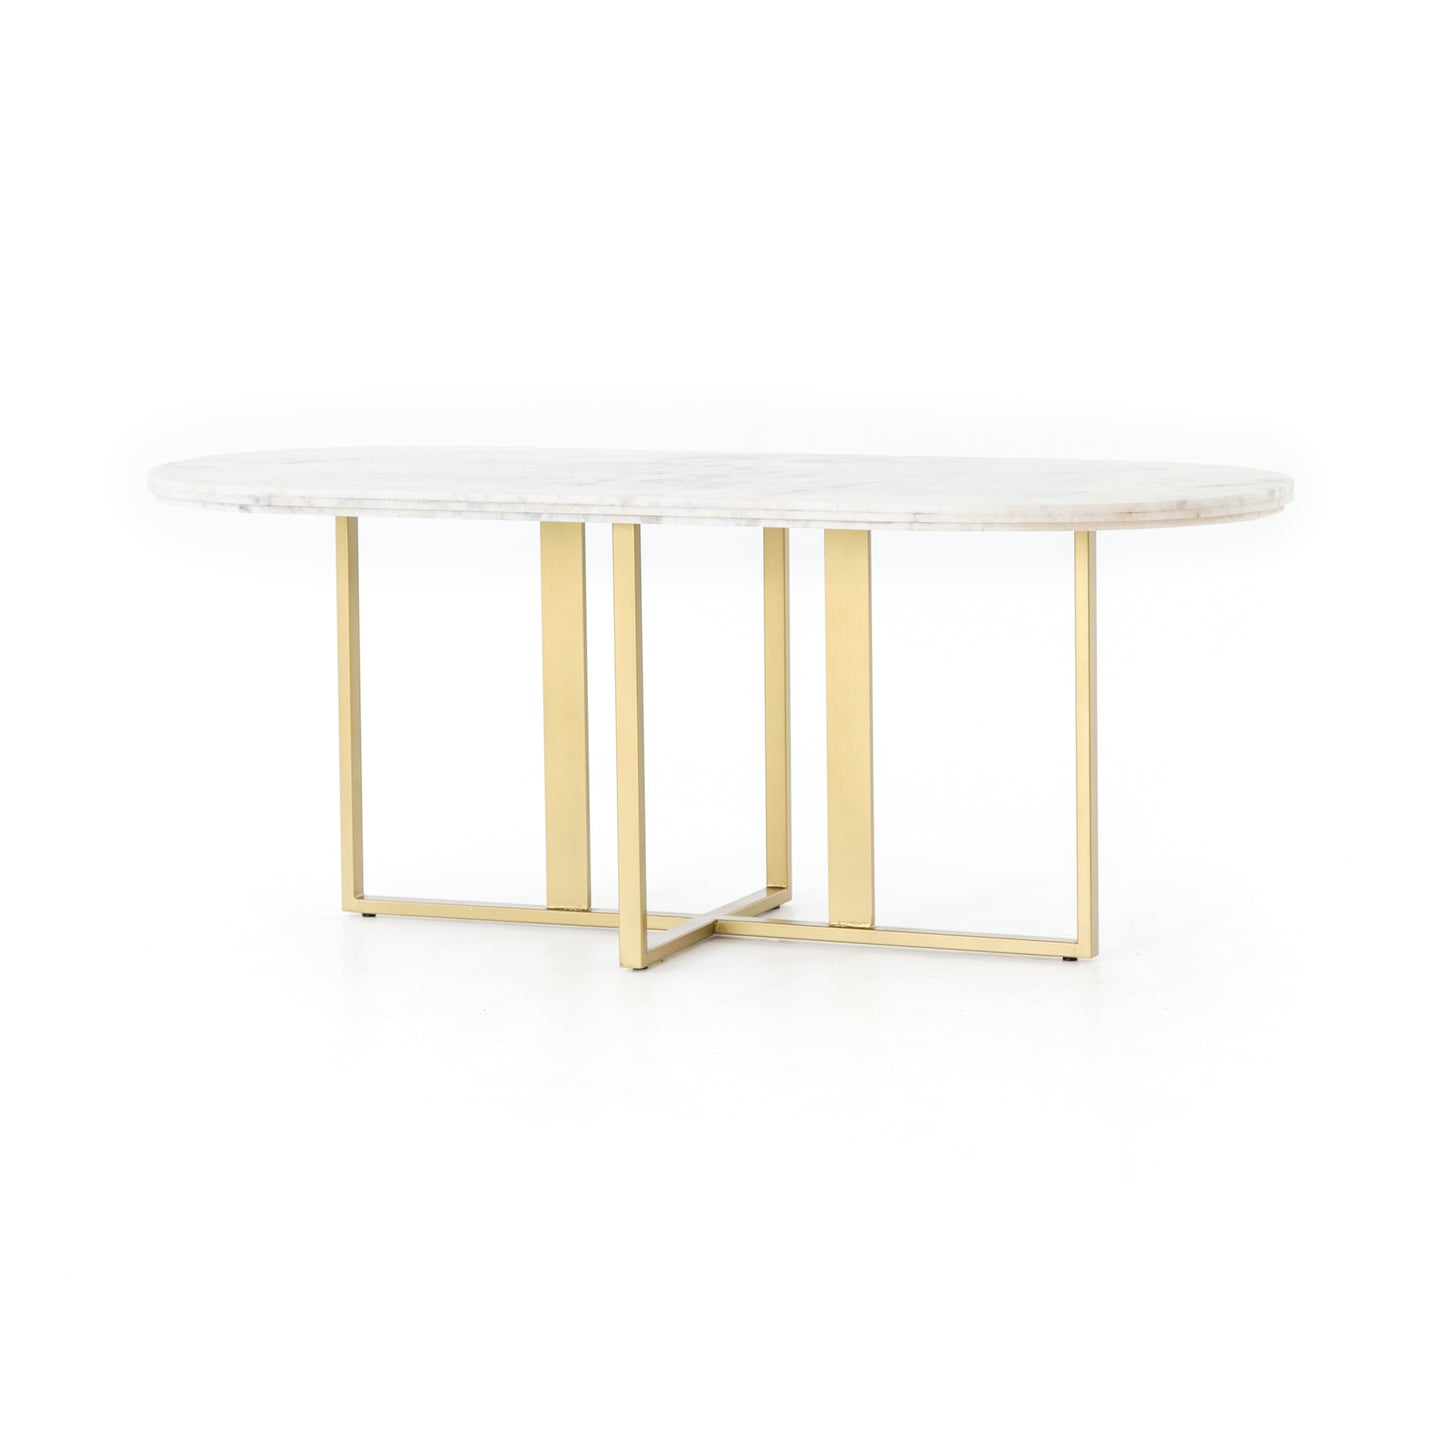 Load image into Gallery viewer, Devan Oval Dining Table Brass PatinaDining Table Four Hands  Brass Patina   Four Hands, Mid Century Modern Furniture, Old Bones Furniture Company, Old Bones Co, Modern Mid Century, Designer Furniture, https://www.oldbonesco.com/
